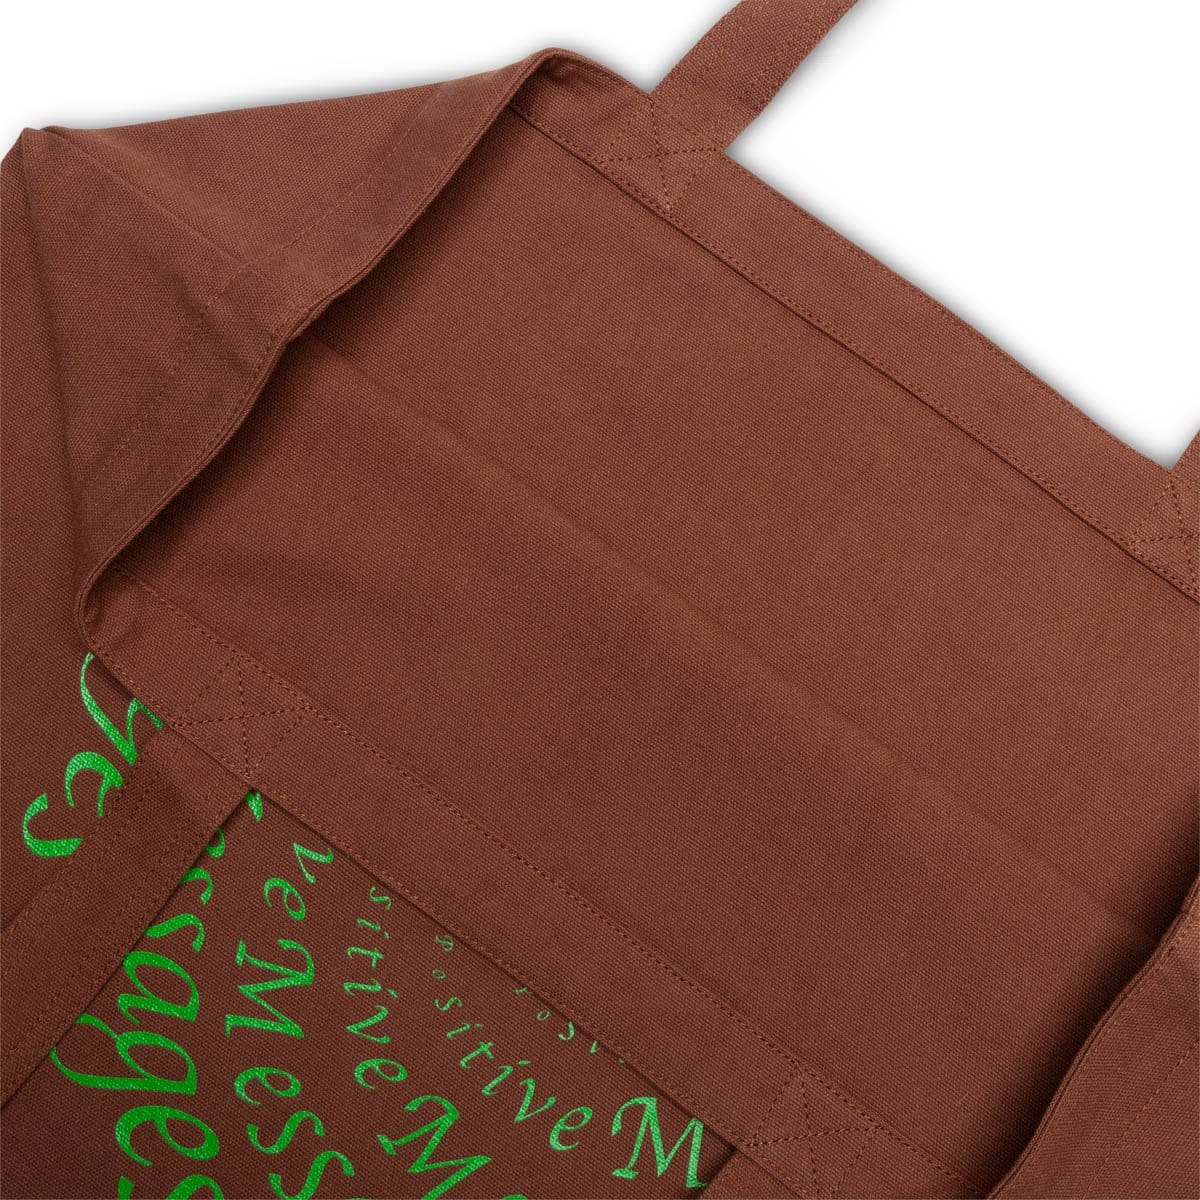 Perks and Mini Bags TOASTED RYE / O/S IS A STATE OF MIND TOTE